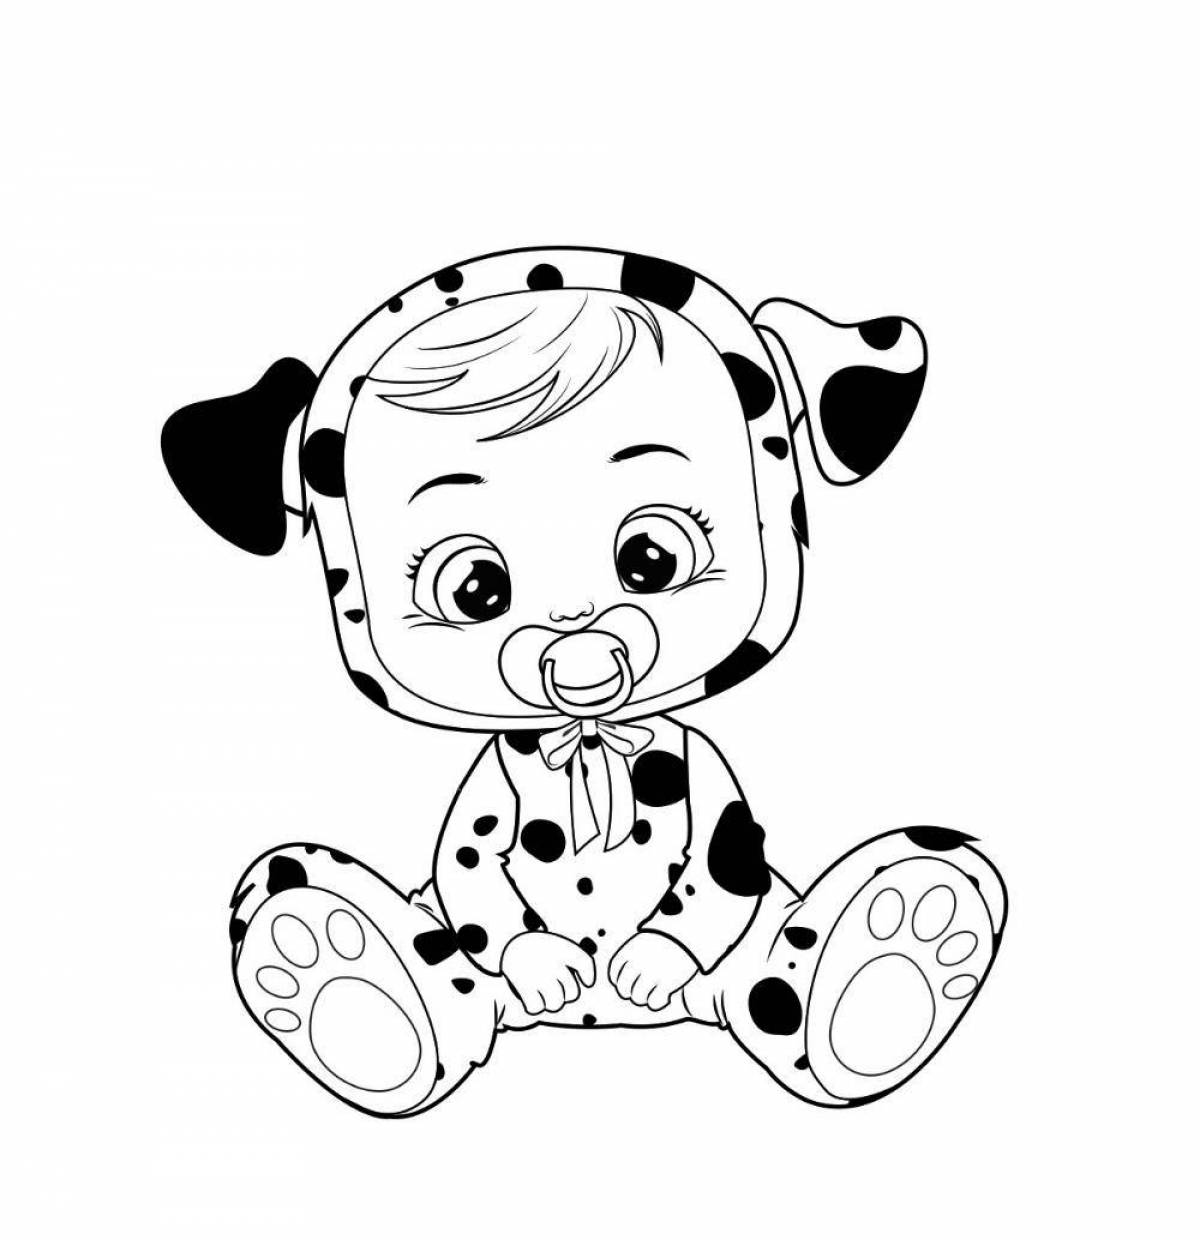 Charan baby colorful coloring page